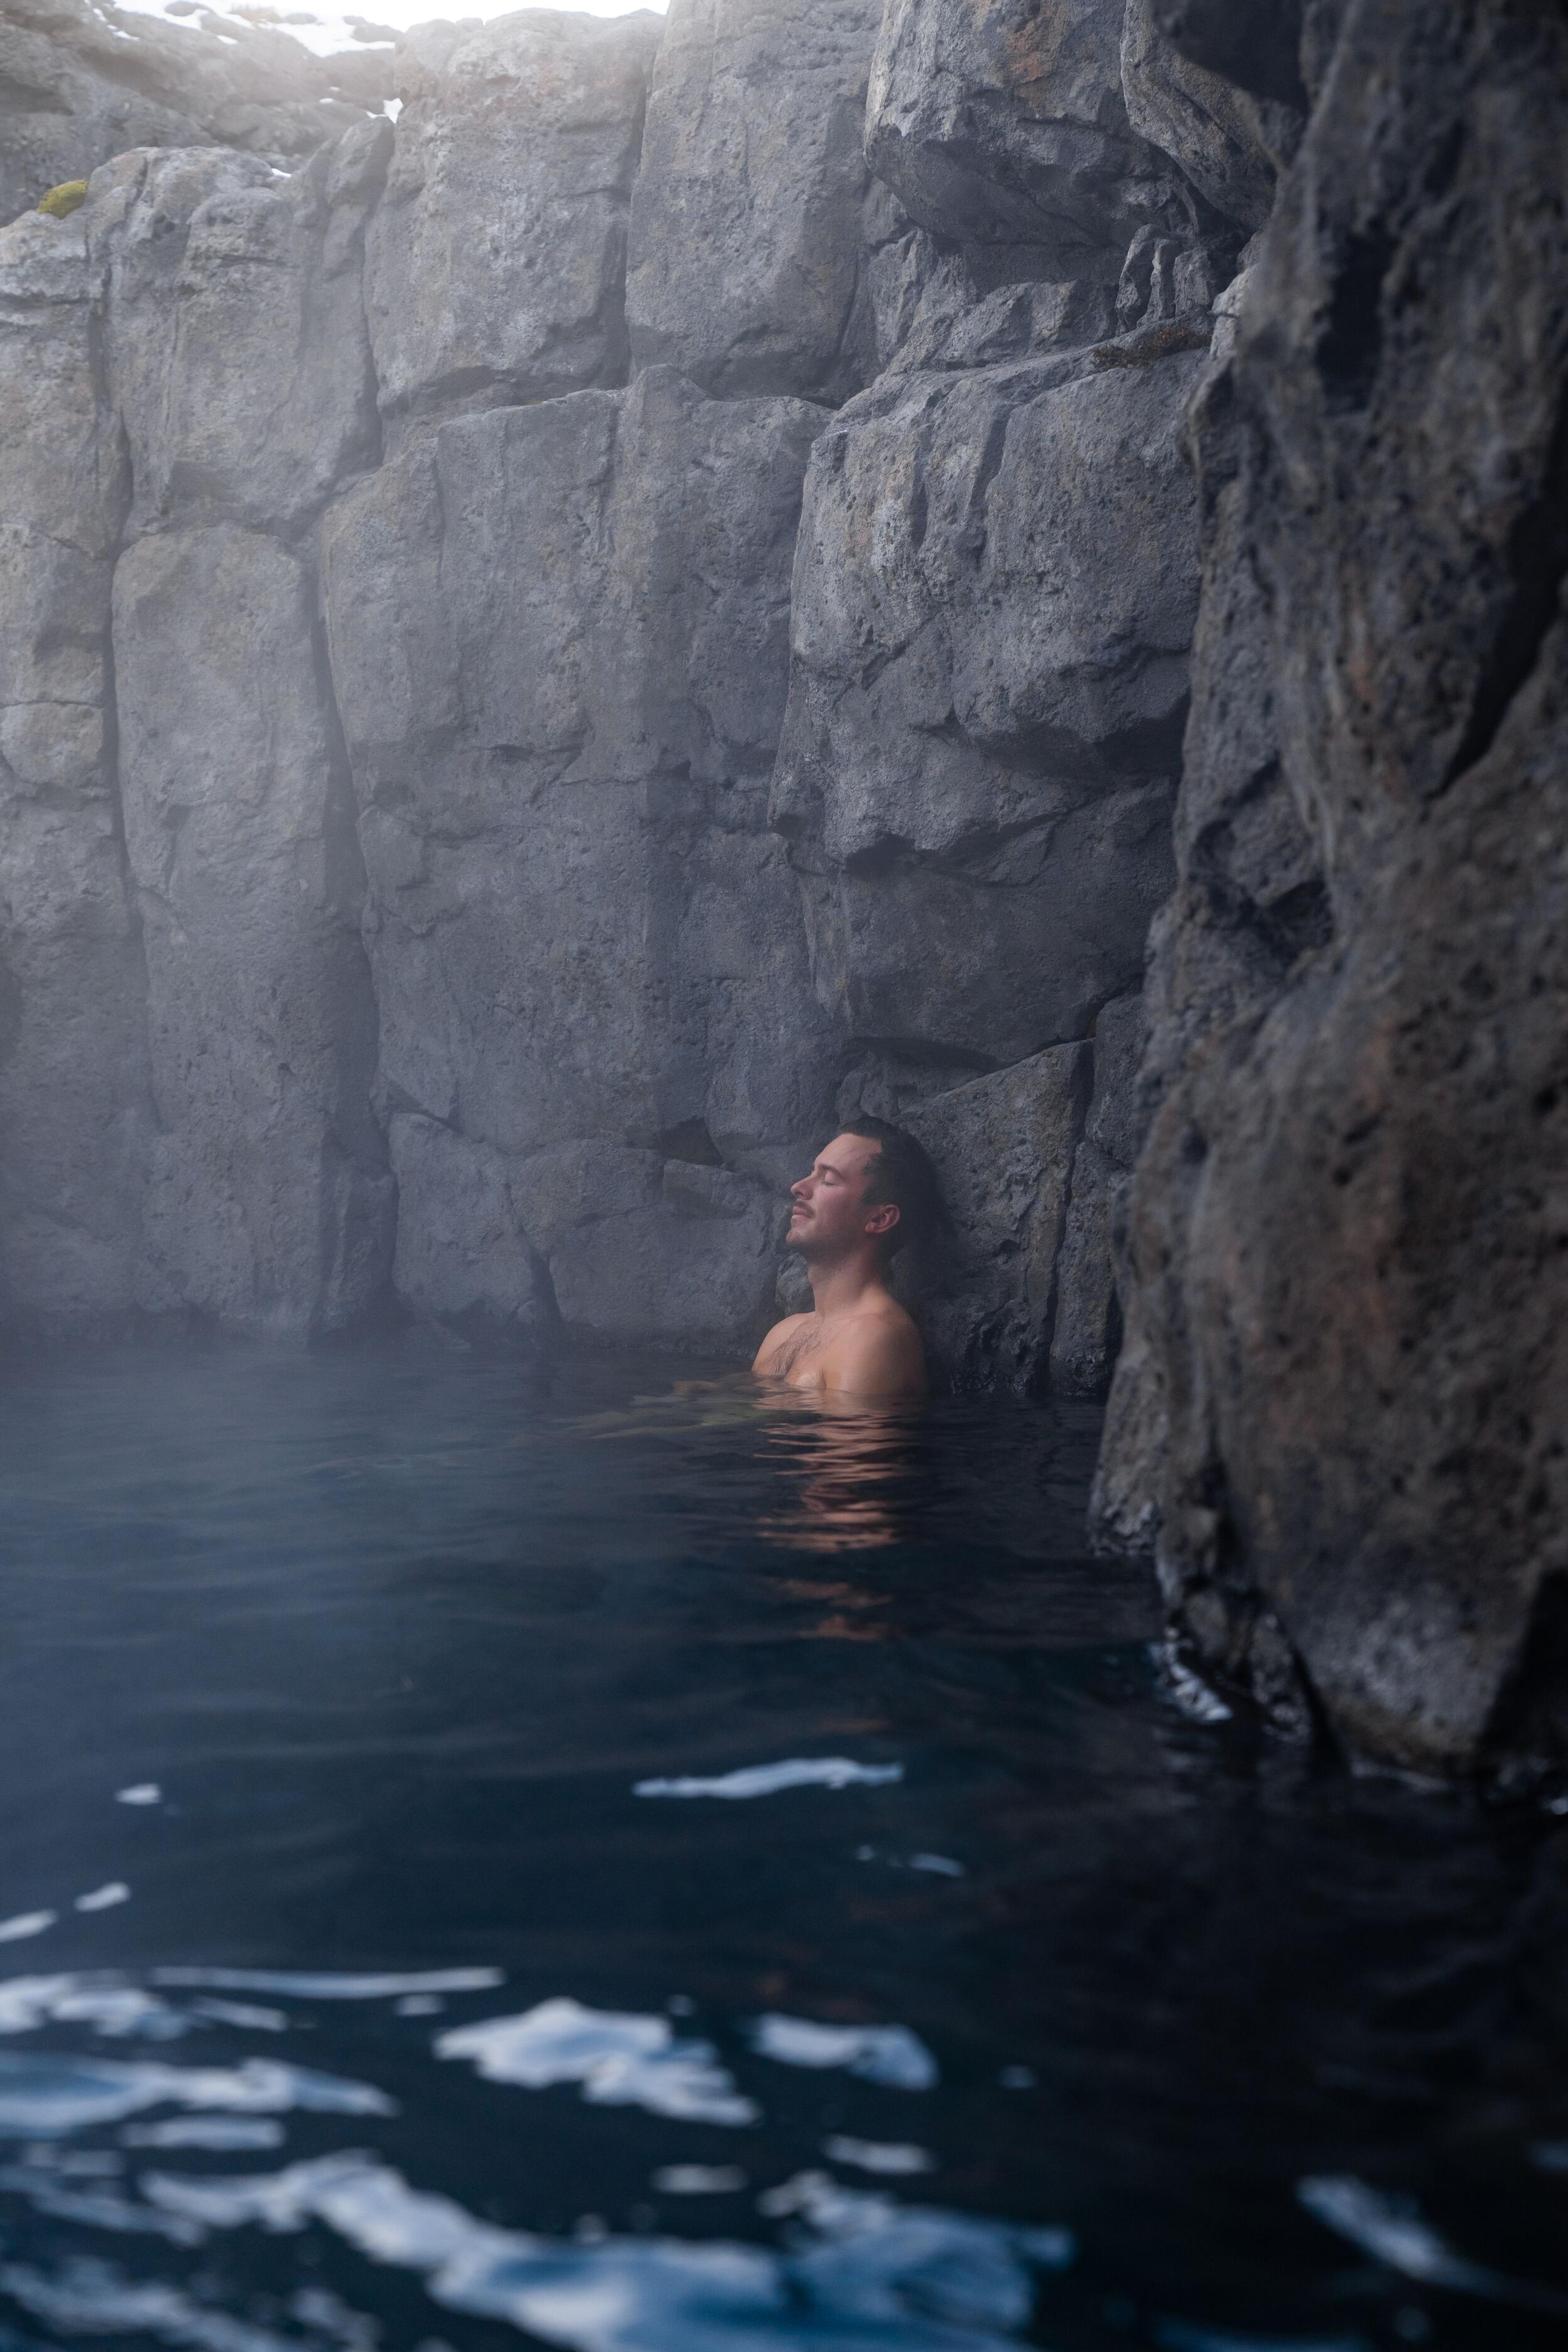 A man leans back against a rocky cliff in the steamy waters of Sky Lagoon, lost in a moment of relaxation and solitude.